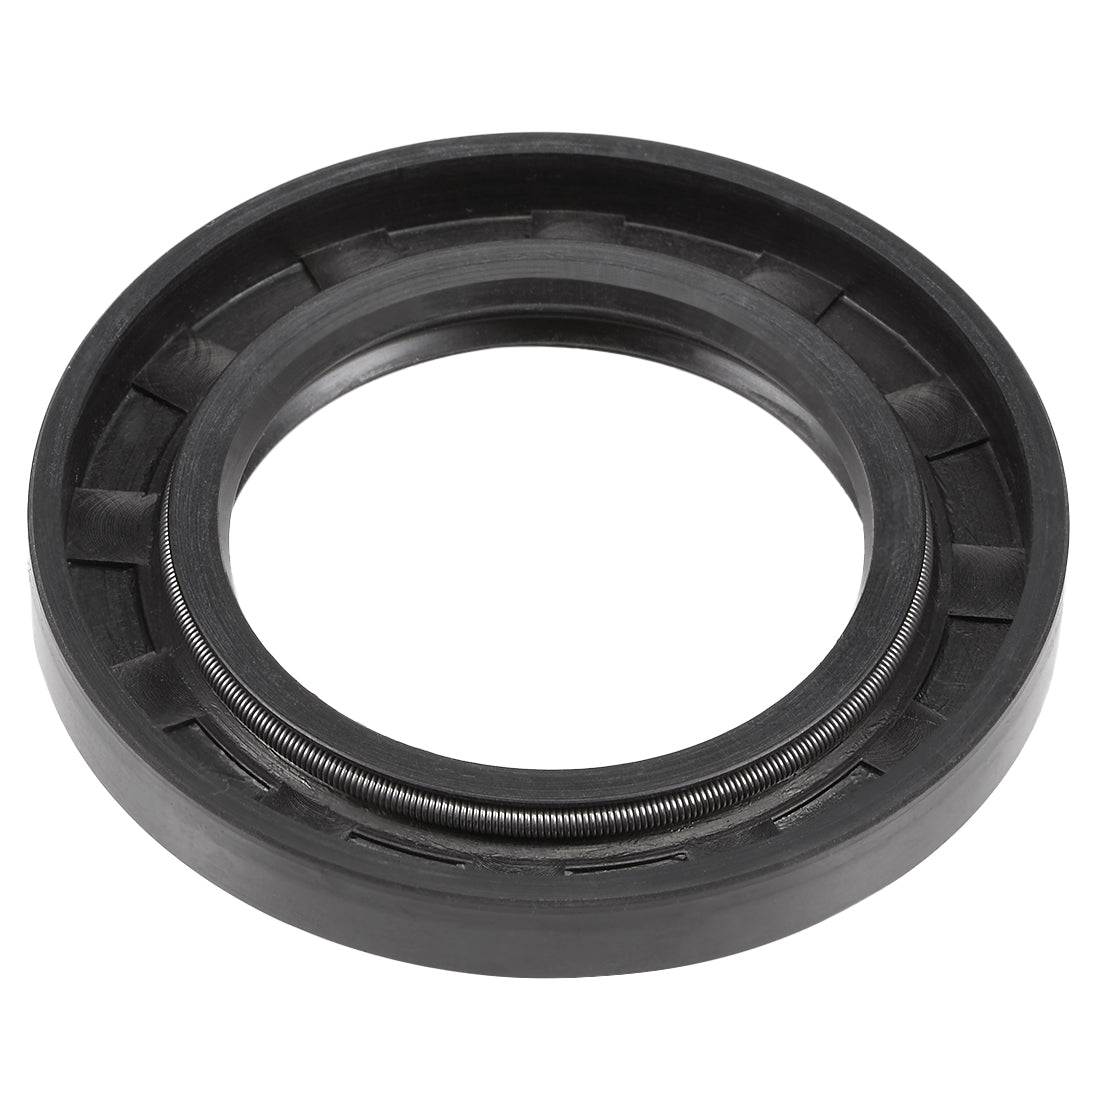 uxcell Uxcell Oil Seal, TC 40mm x 62mm x 8mm, Nitrile Rubber Cover Double Lip